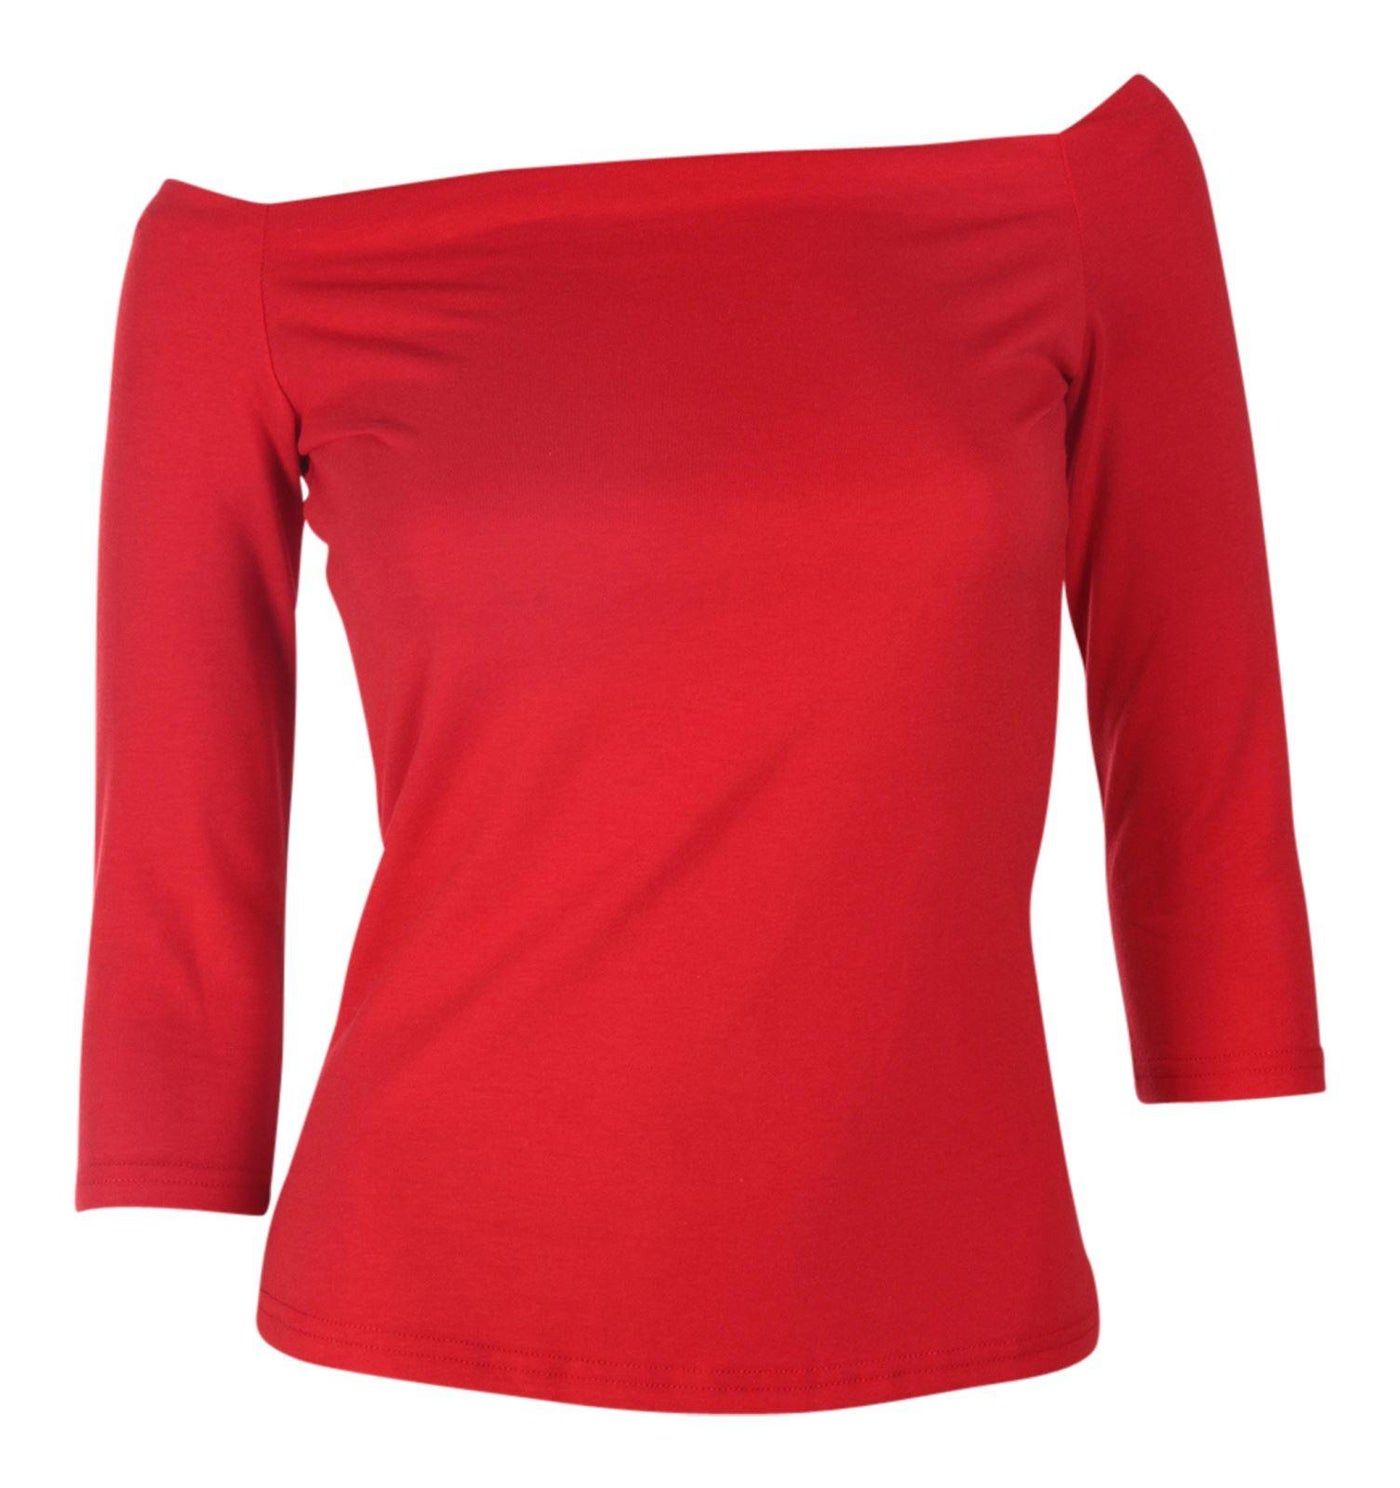 Retro red off shoulder, long sleeve top, front view